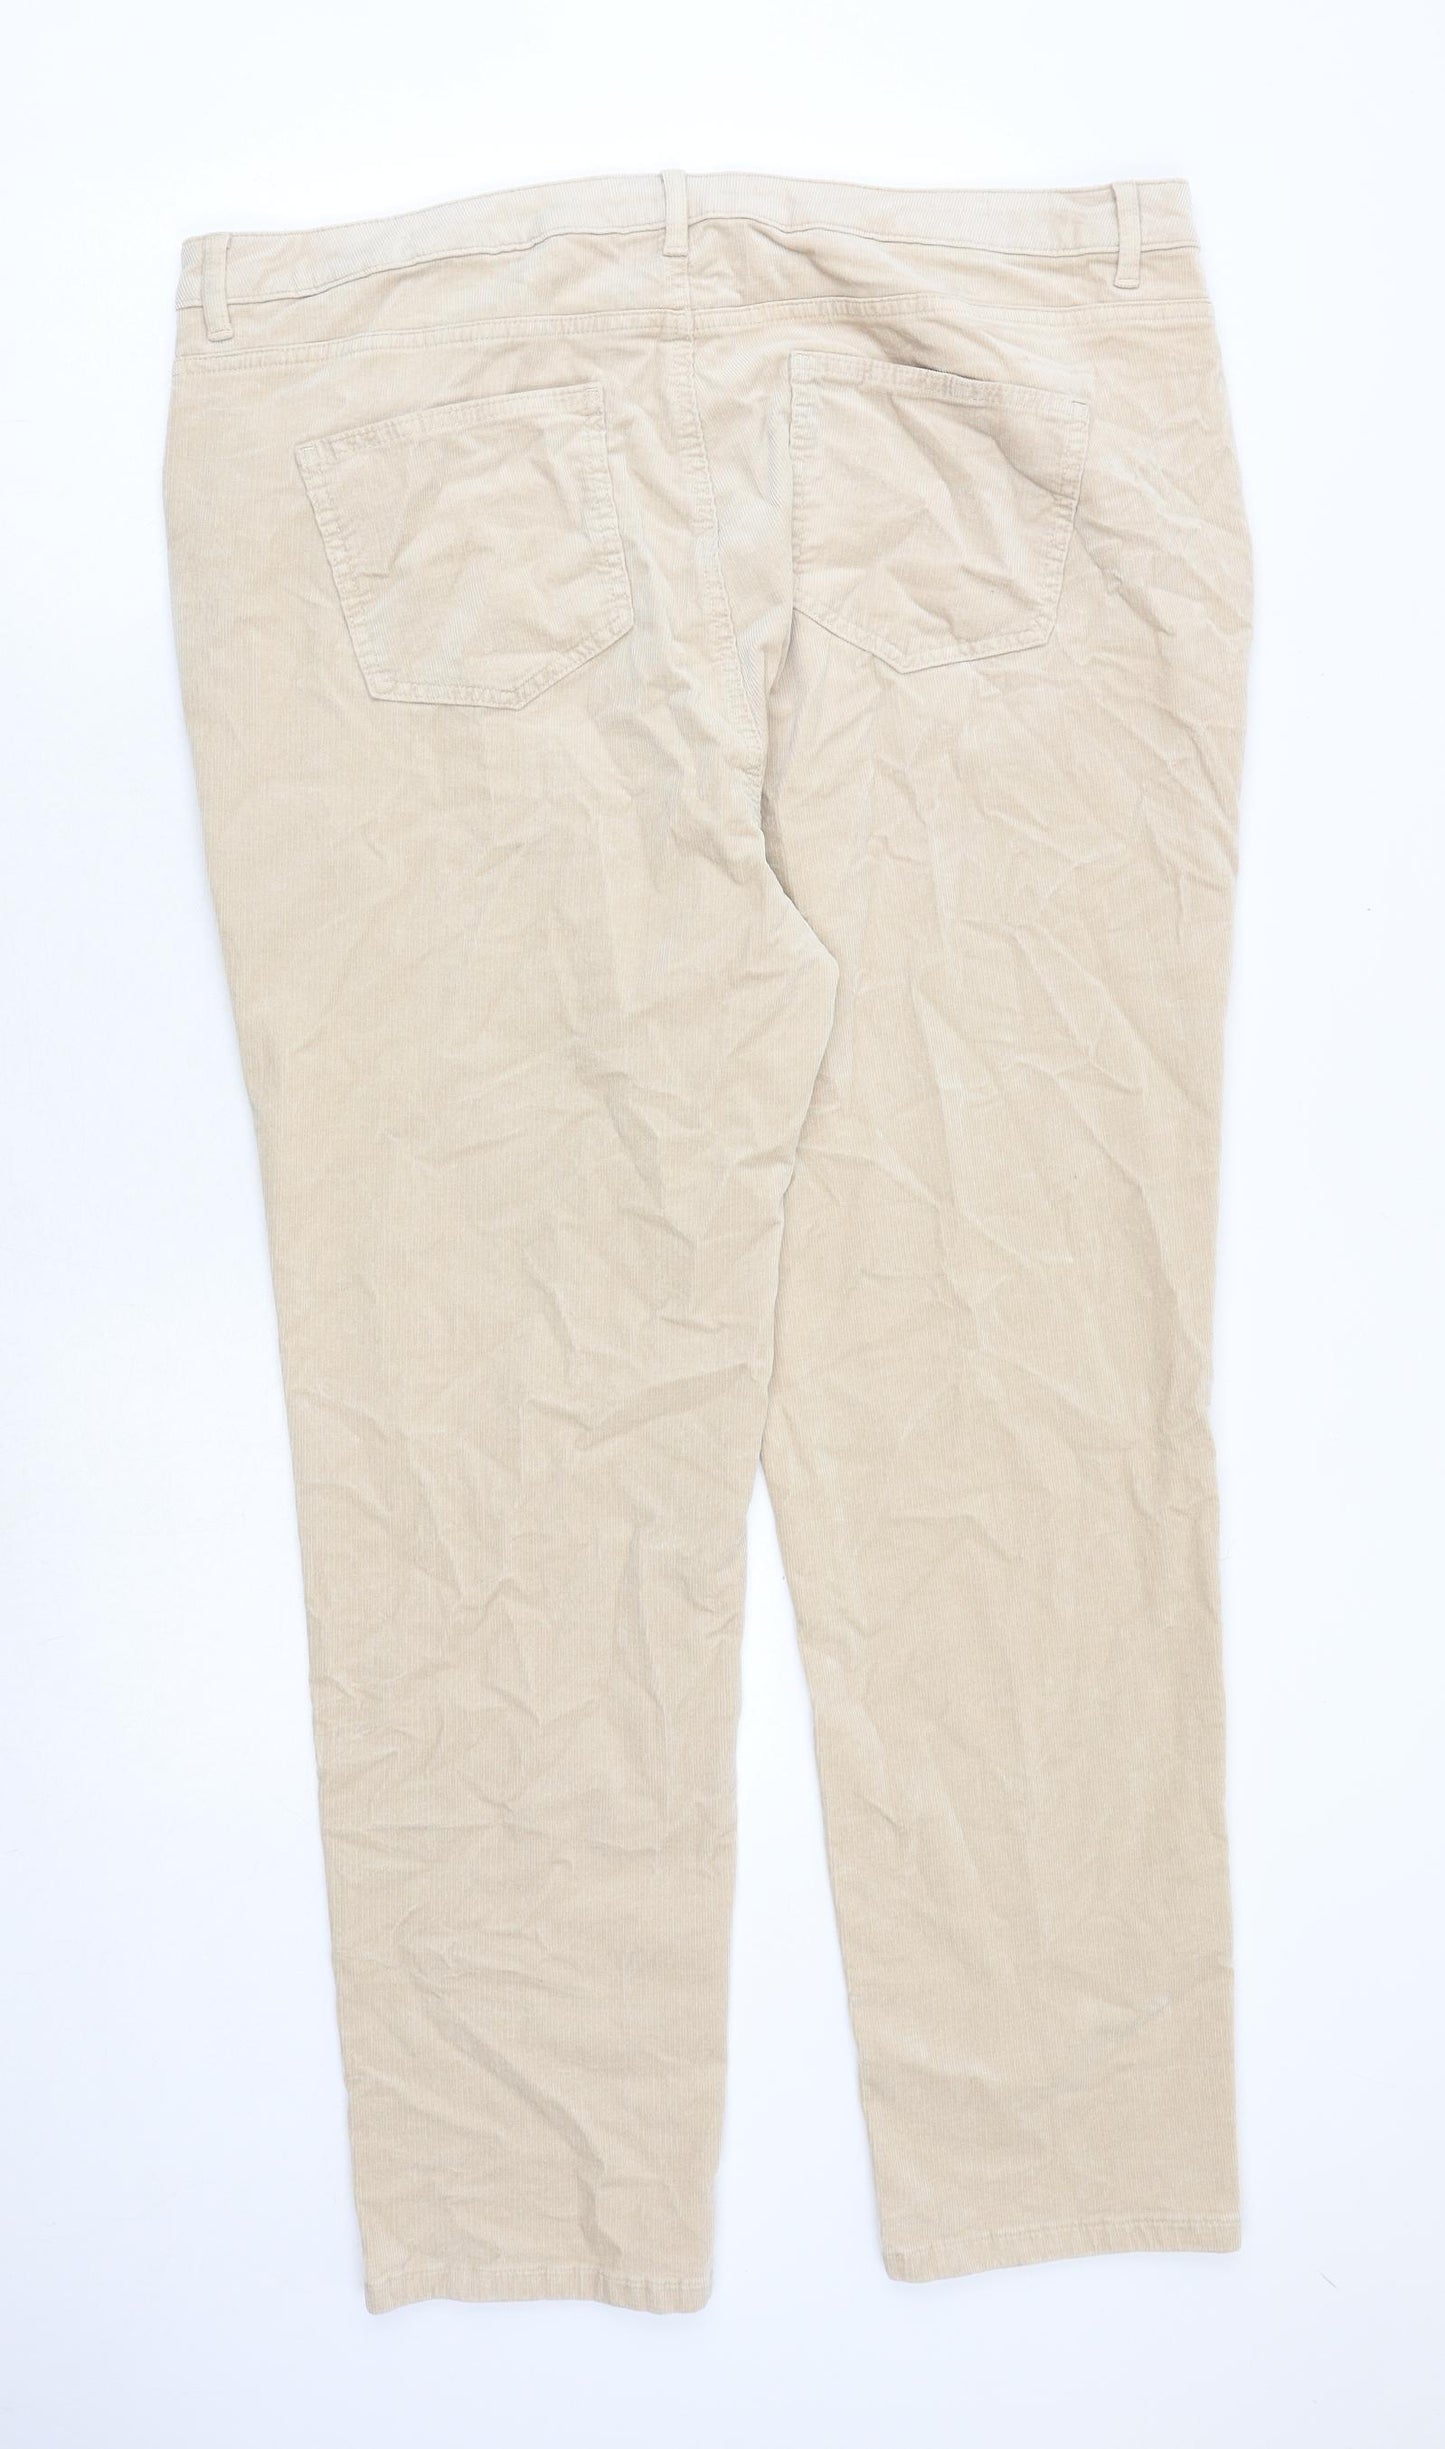 Marks and Spencer Womens Beige Cotton Trousers Size 22 Regular Zip